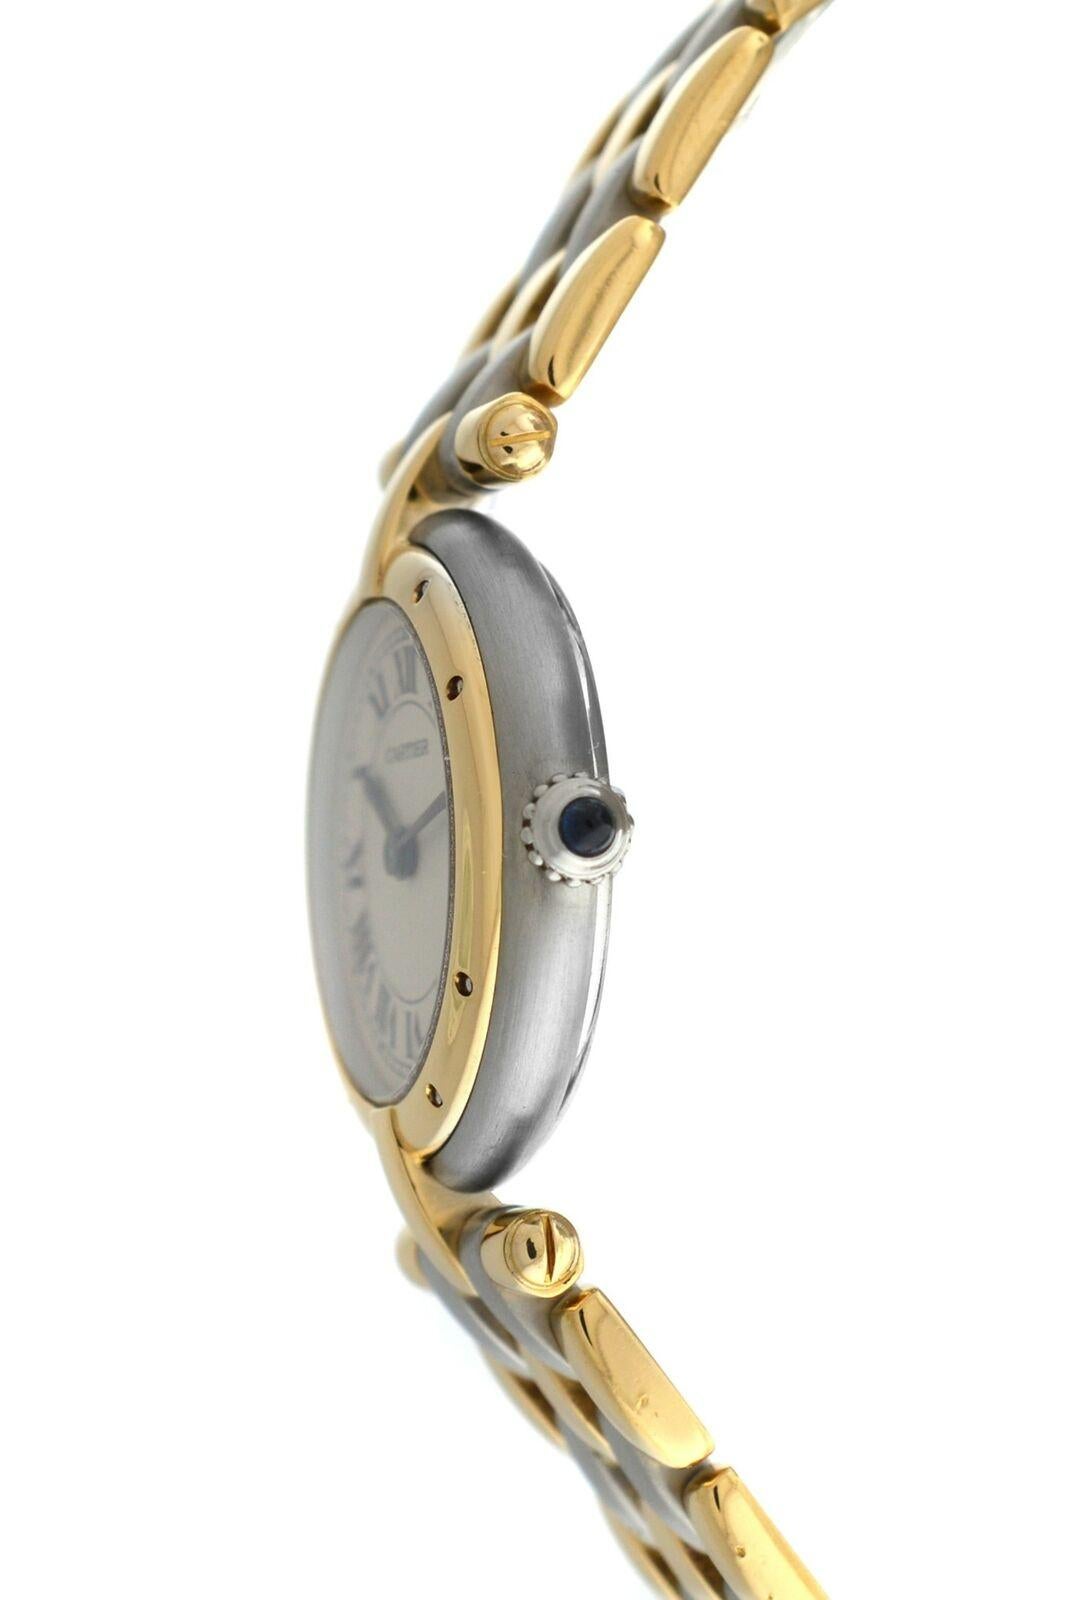 Brand	Cartier
Model	Panthere Vendome 
Gender	Ladies
Condition	Pre-owned
Movement	Swiss Quartz
Case Material	Stainless Steel & 18K Yellow Gold
Bracelet / Strap Material	
Stainless Steel & 18K Yellow Gold

Clasp / Buckle Material	
Stainless Steel